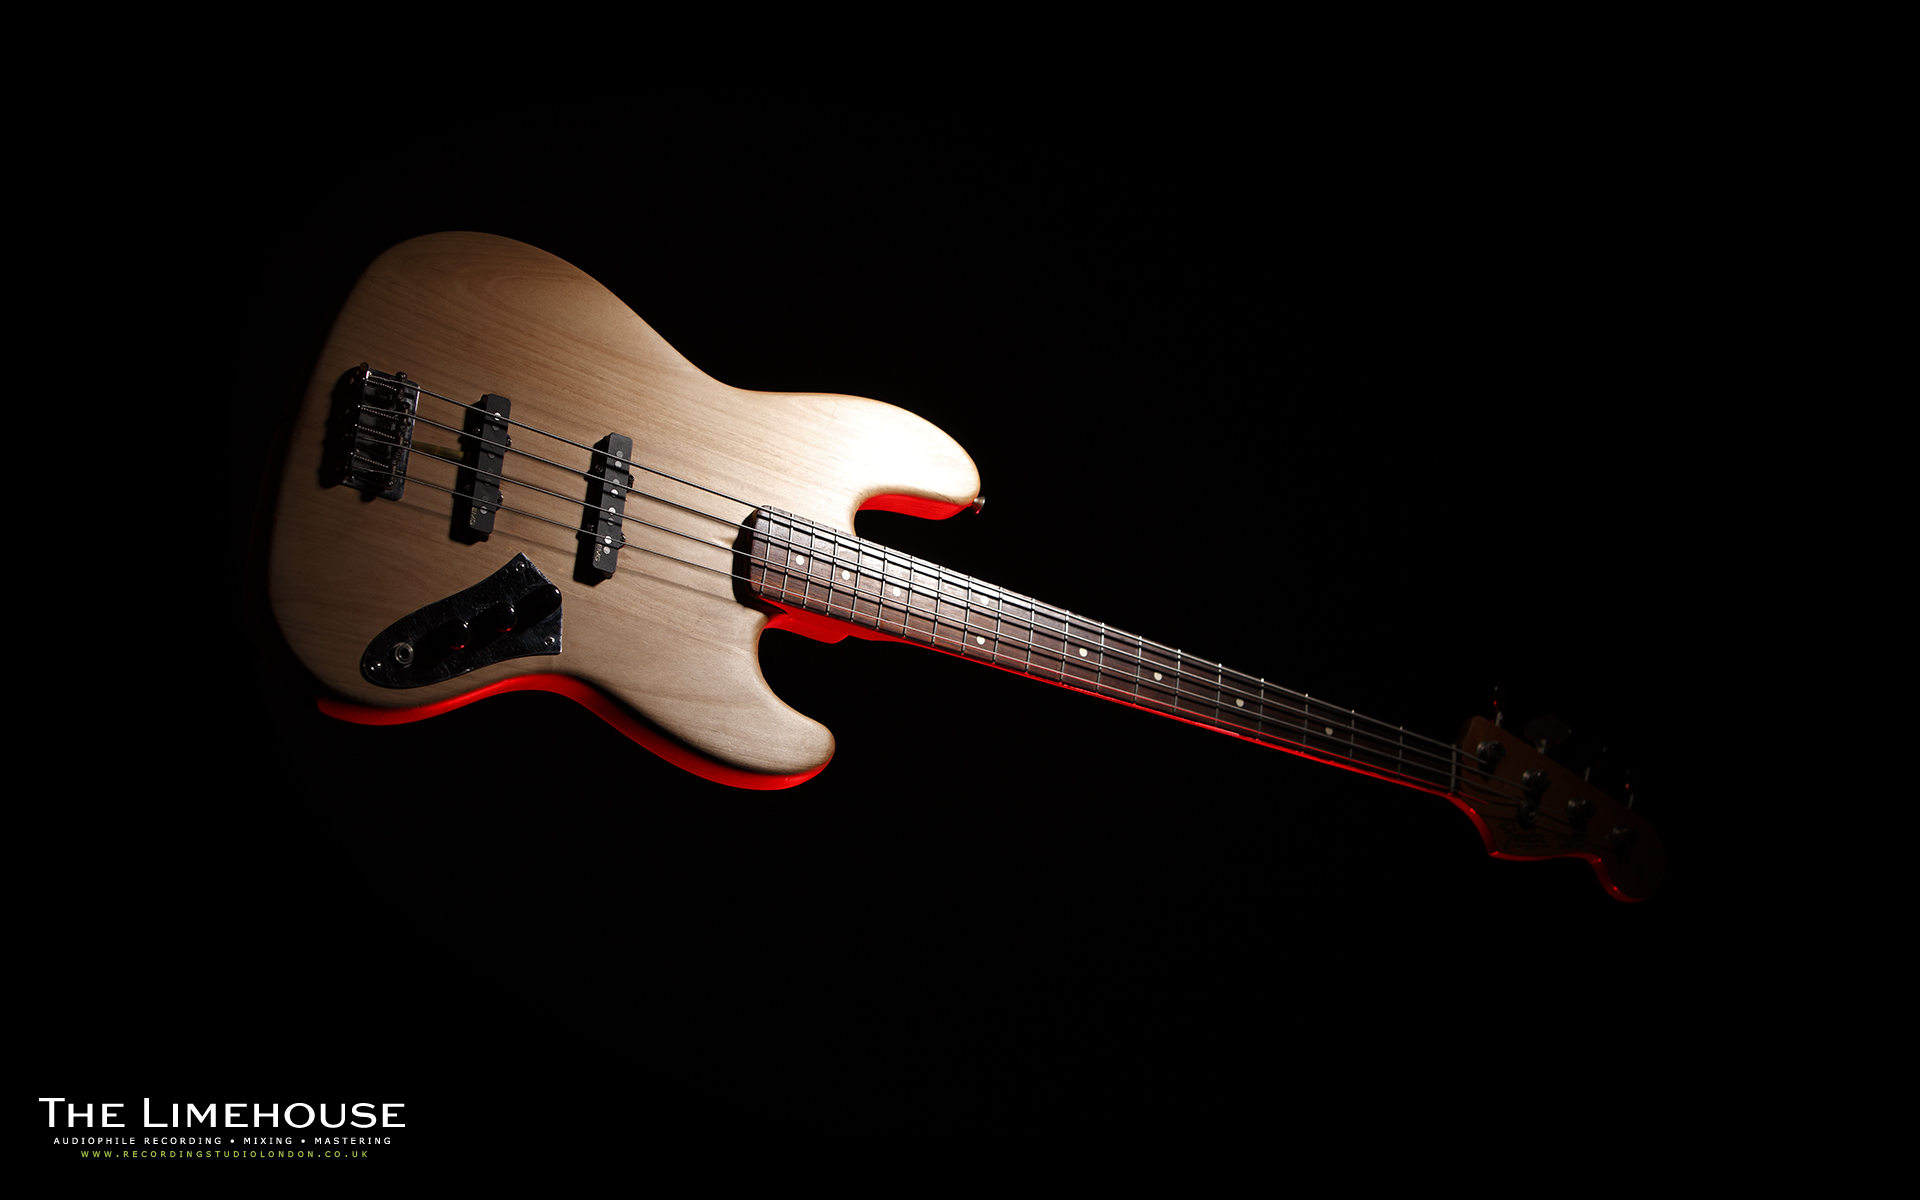 Bass Guitar Wallpaper Images amp Pictures   Becuo